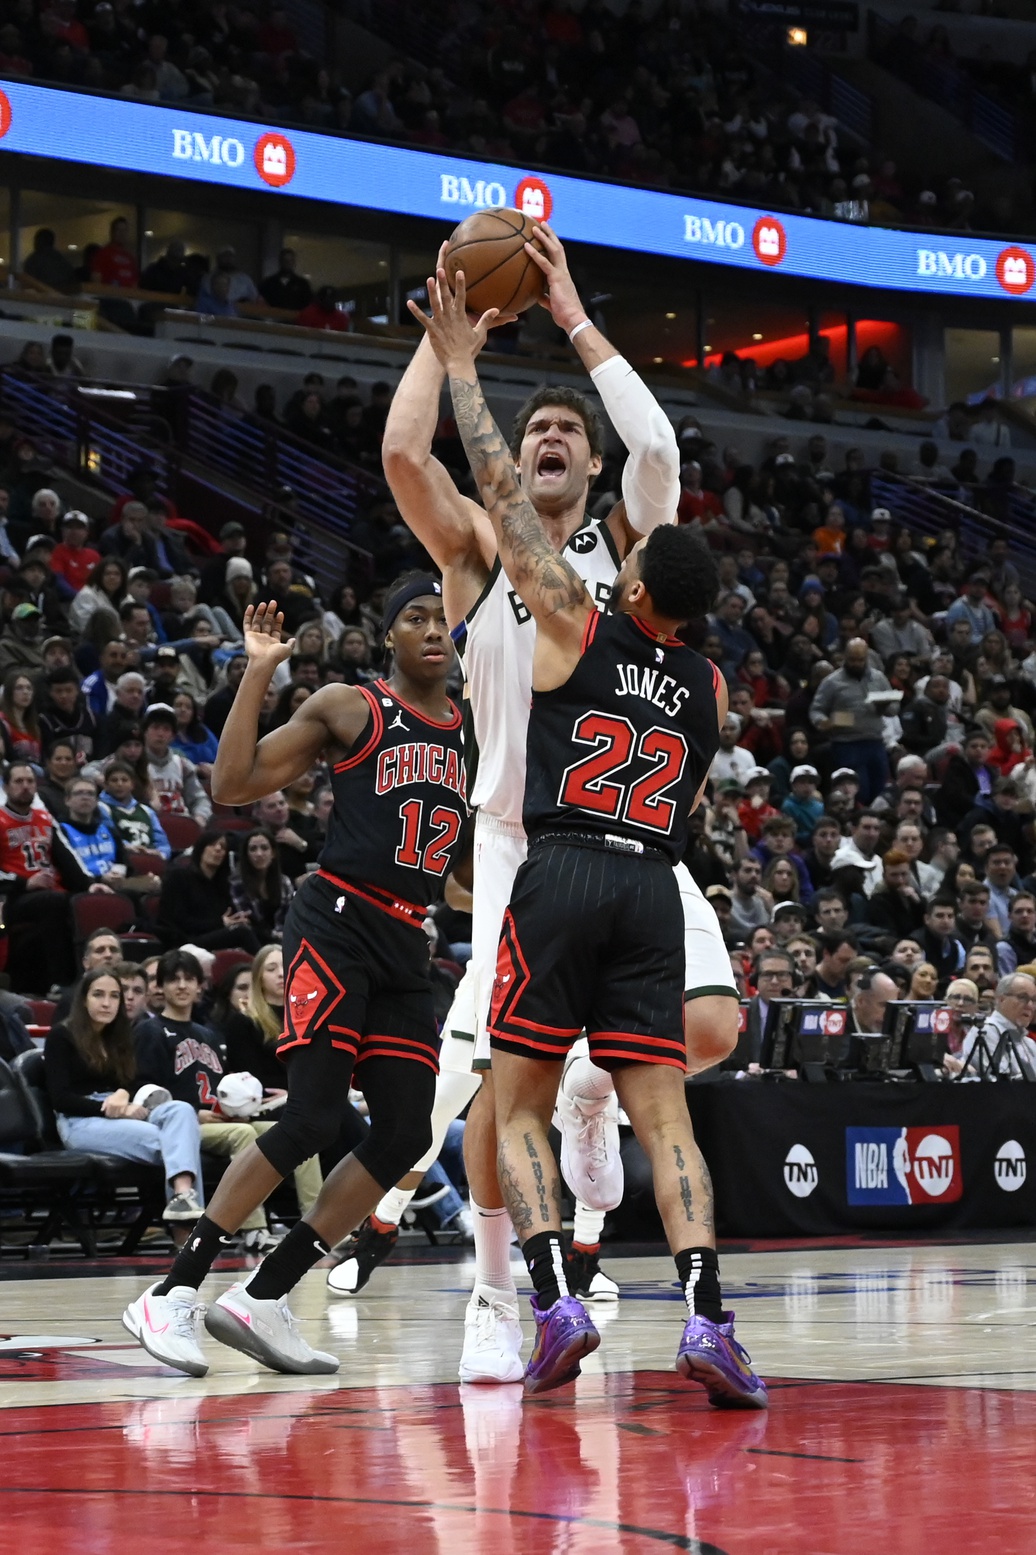 Brook Lopez of the Milwaukee Bucks led the team to victory over the Bulls.